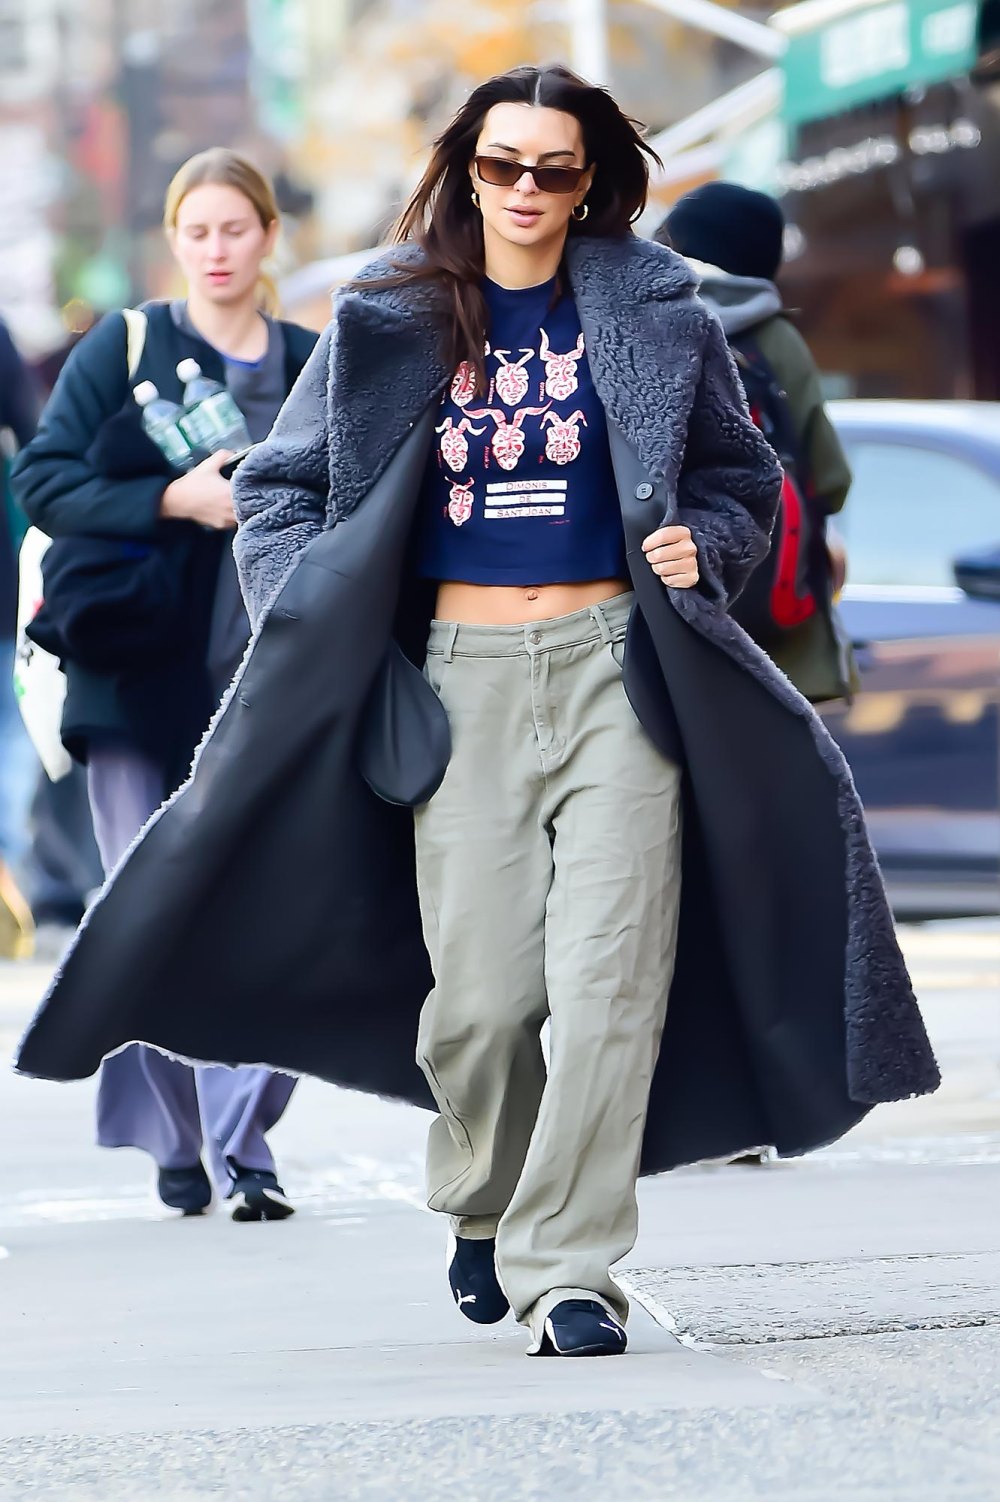 Emily Ratajkowski Pairs a Crop Top With a Sheepskin Coat in NYC | Us Weekly